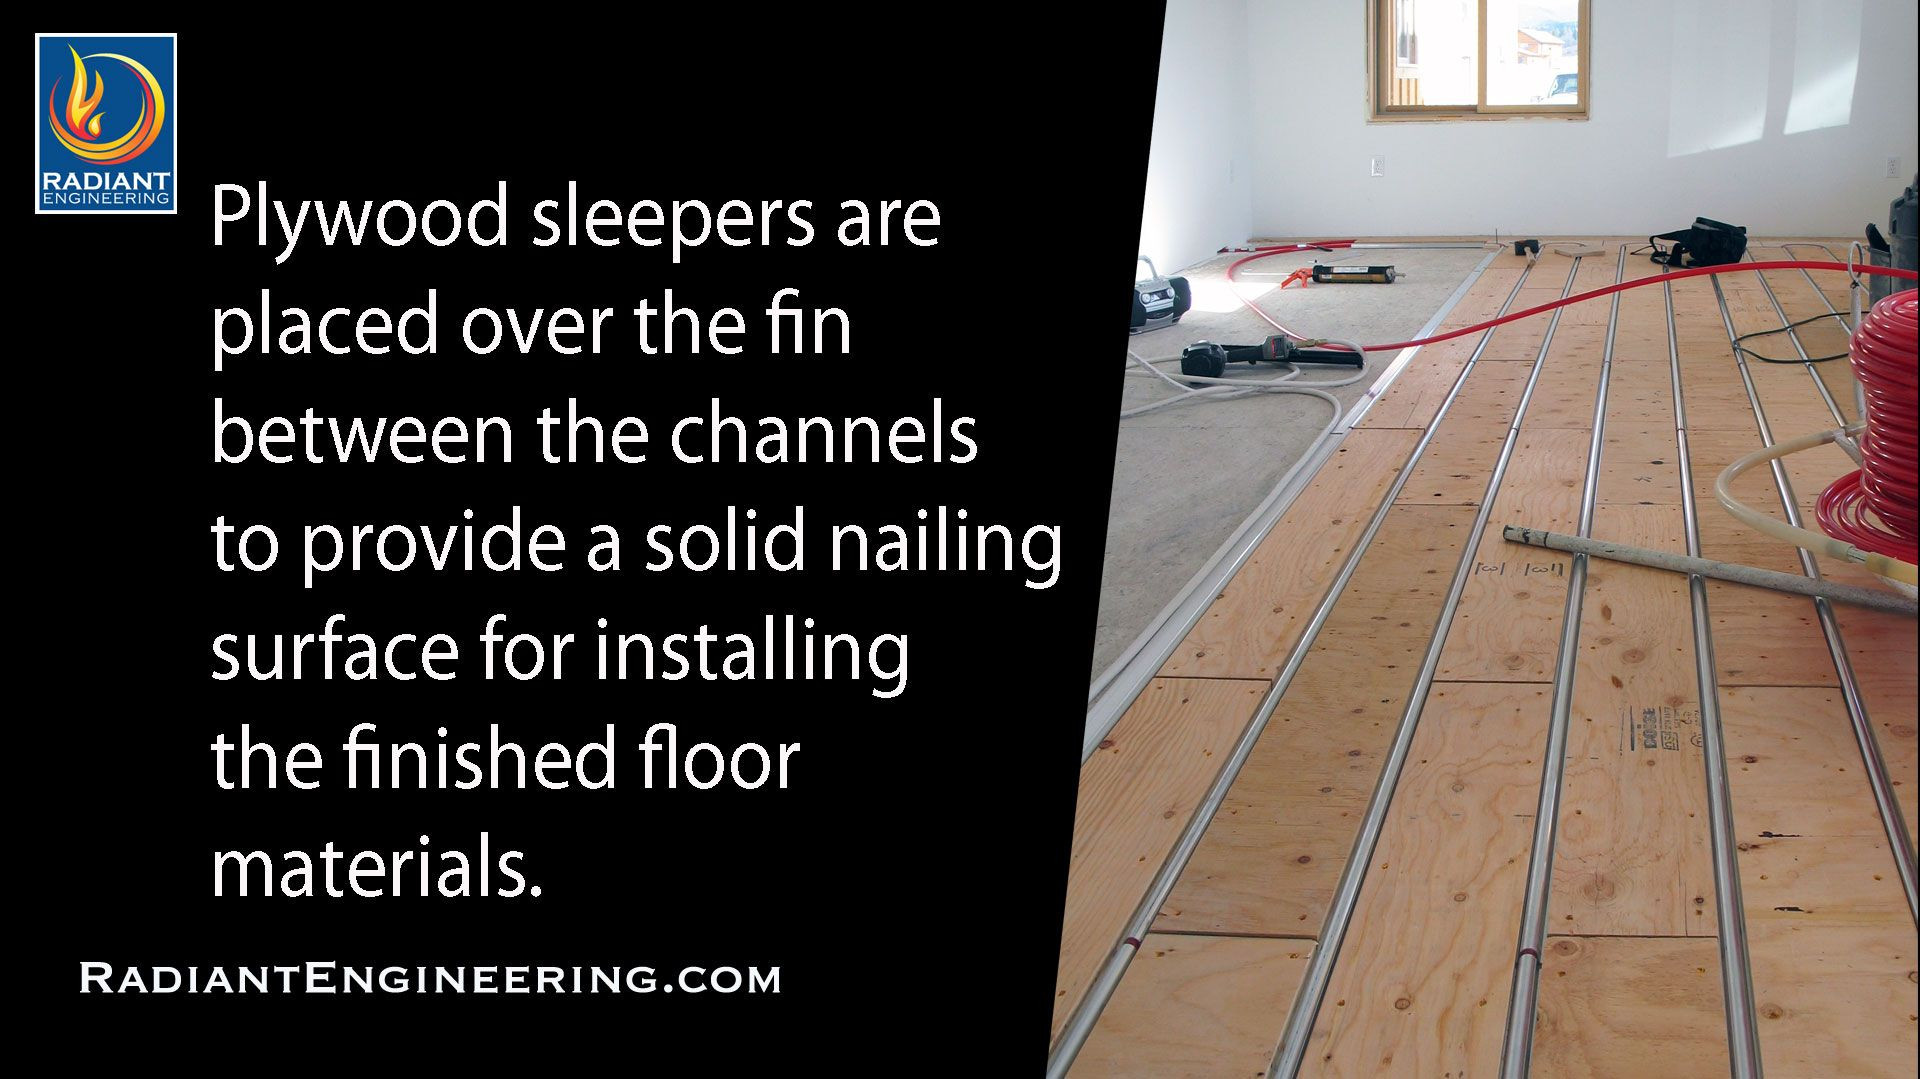 how to put down hardwood floor on concrete of radiant heated floor installation with thermofin u and pex tubing intended for radiant heated floor installation with thermofin u and pex tubing ready for installation of wood